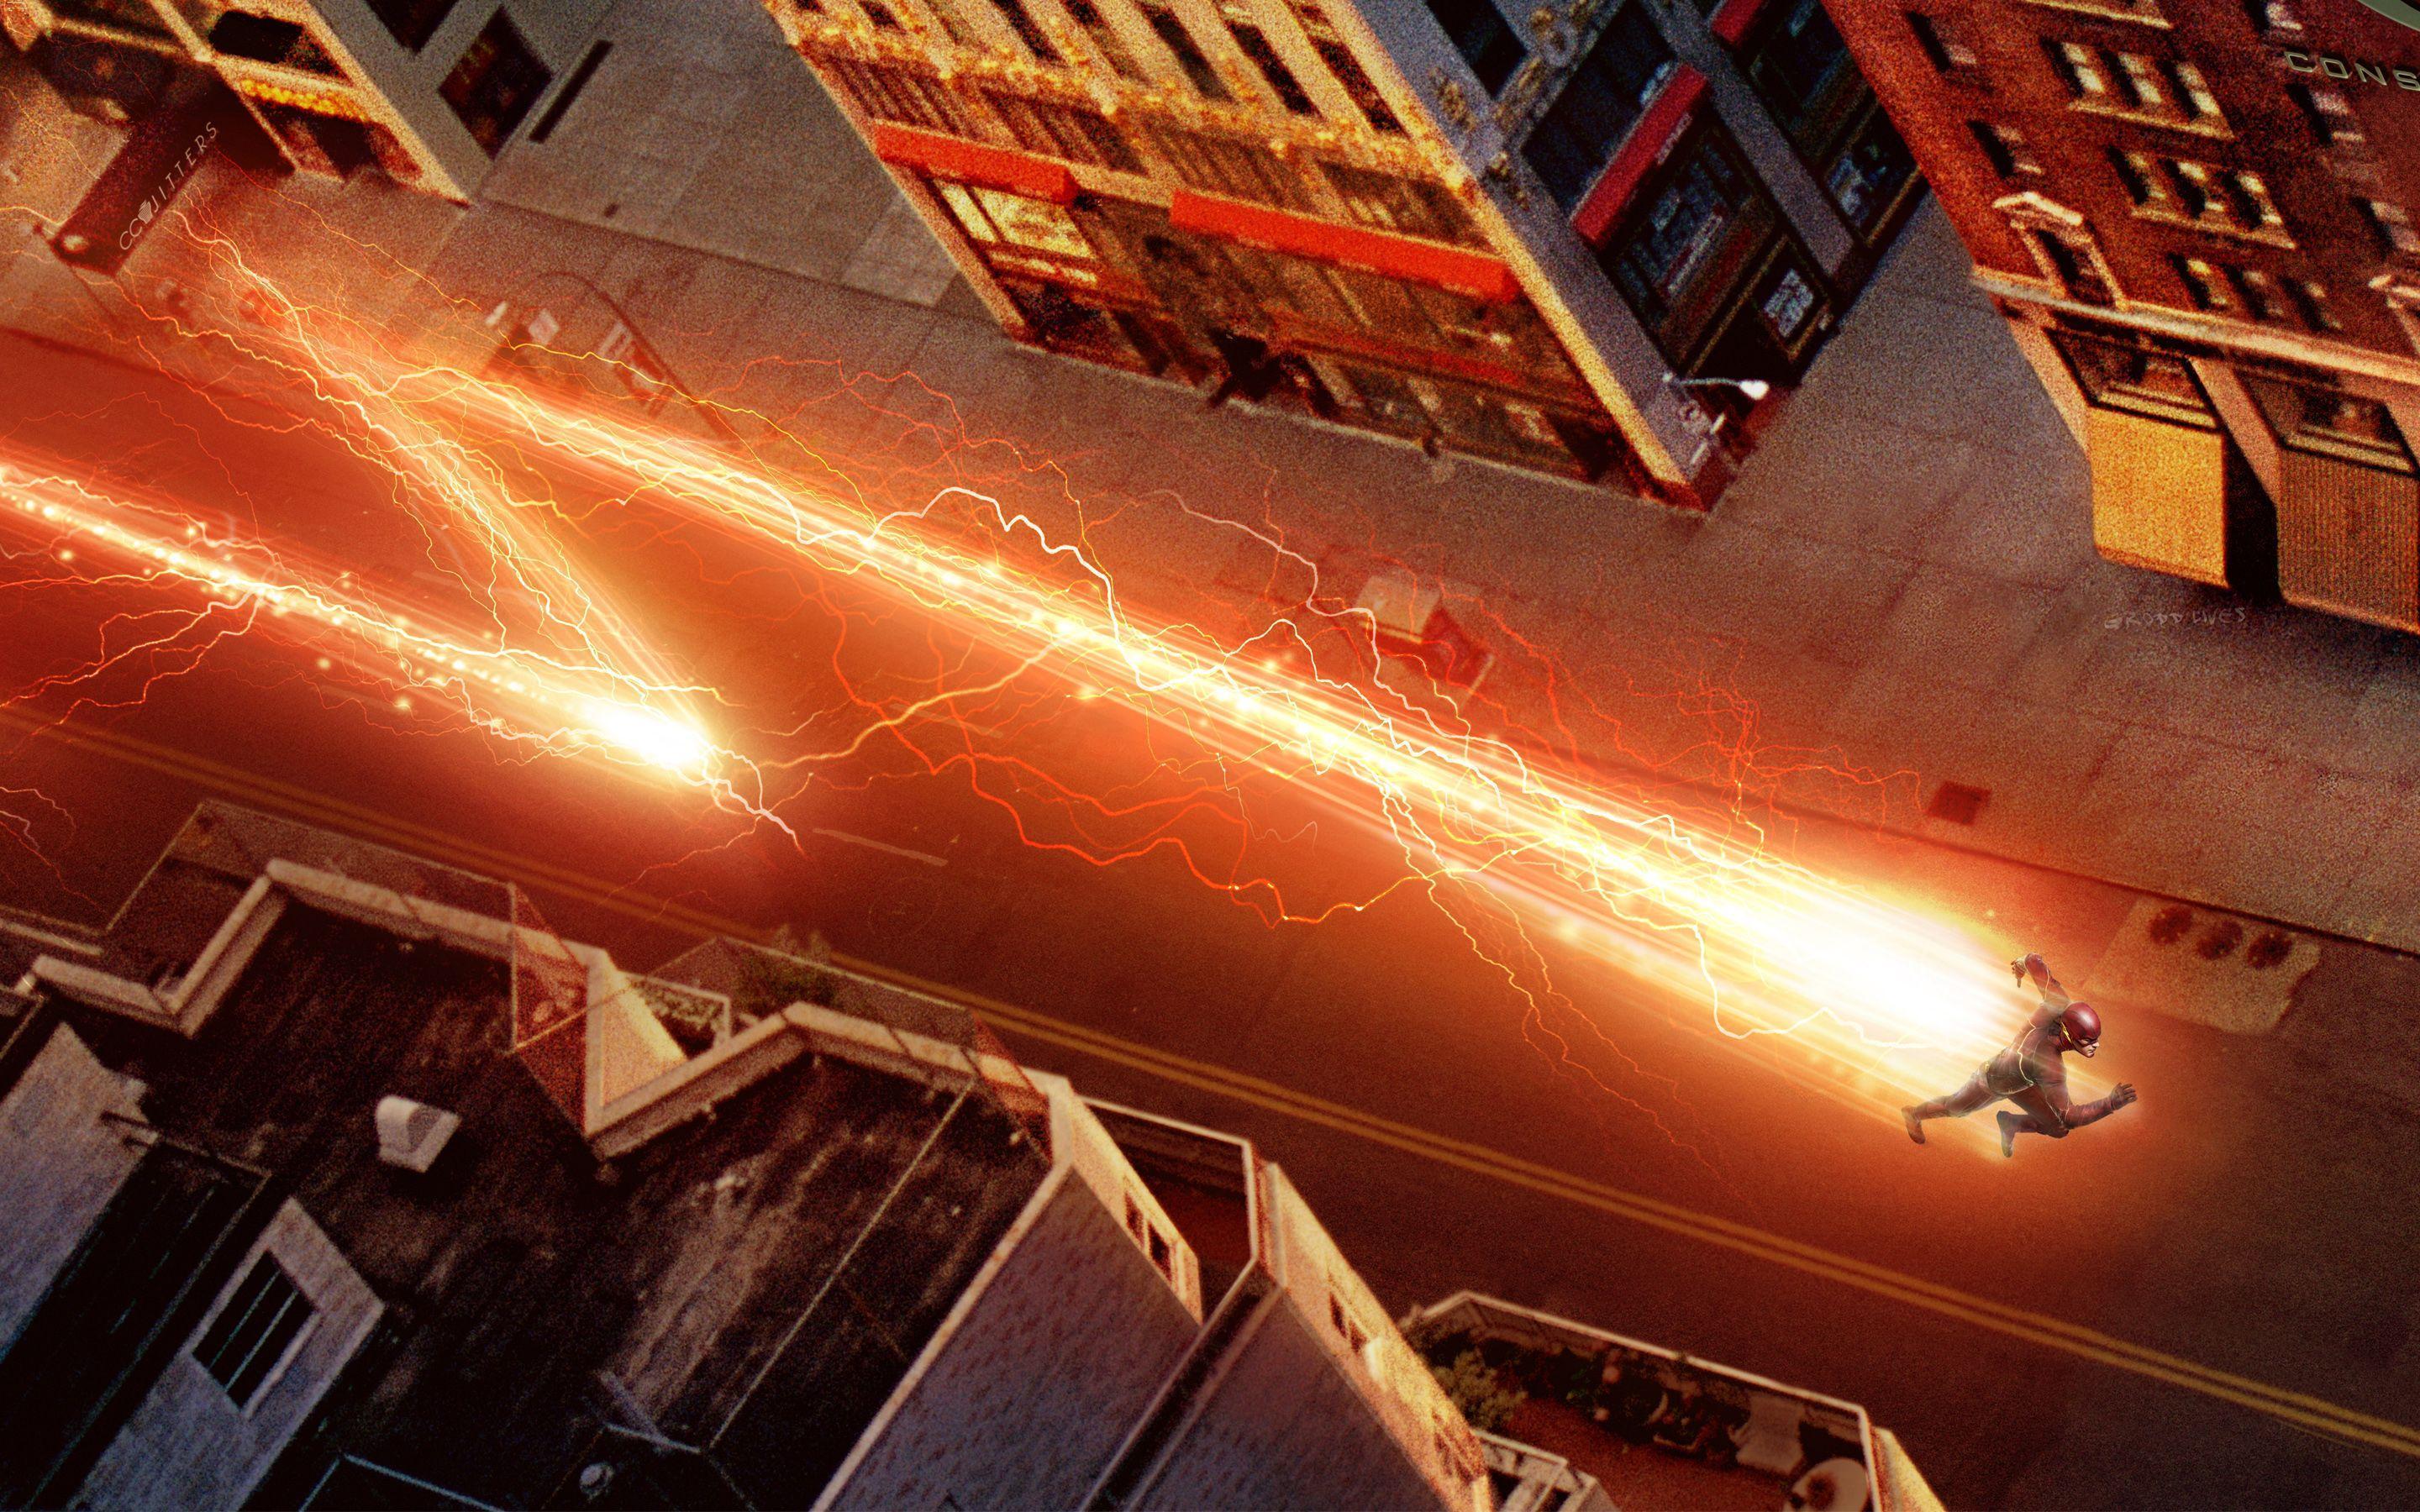 The Flash (2014) HD Wallpaper and Background Image